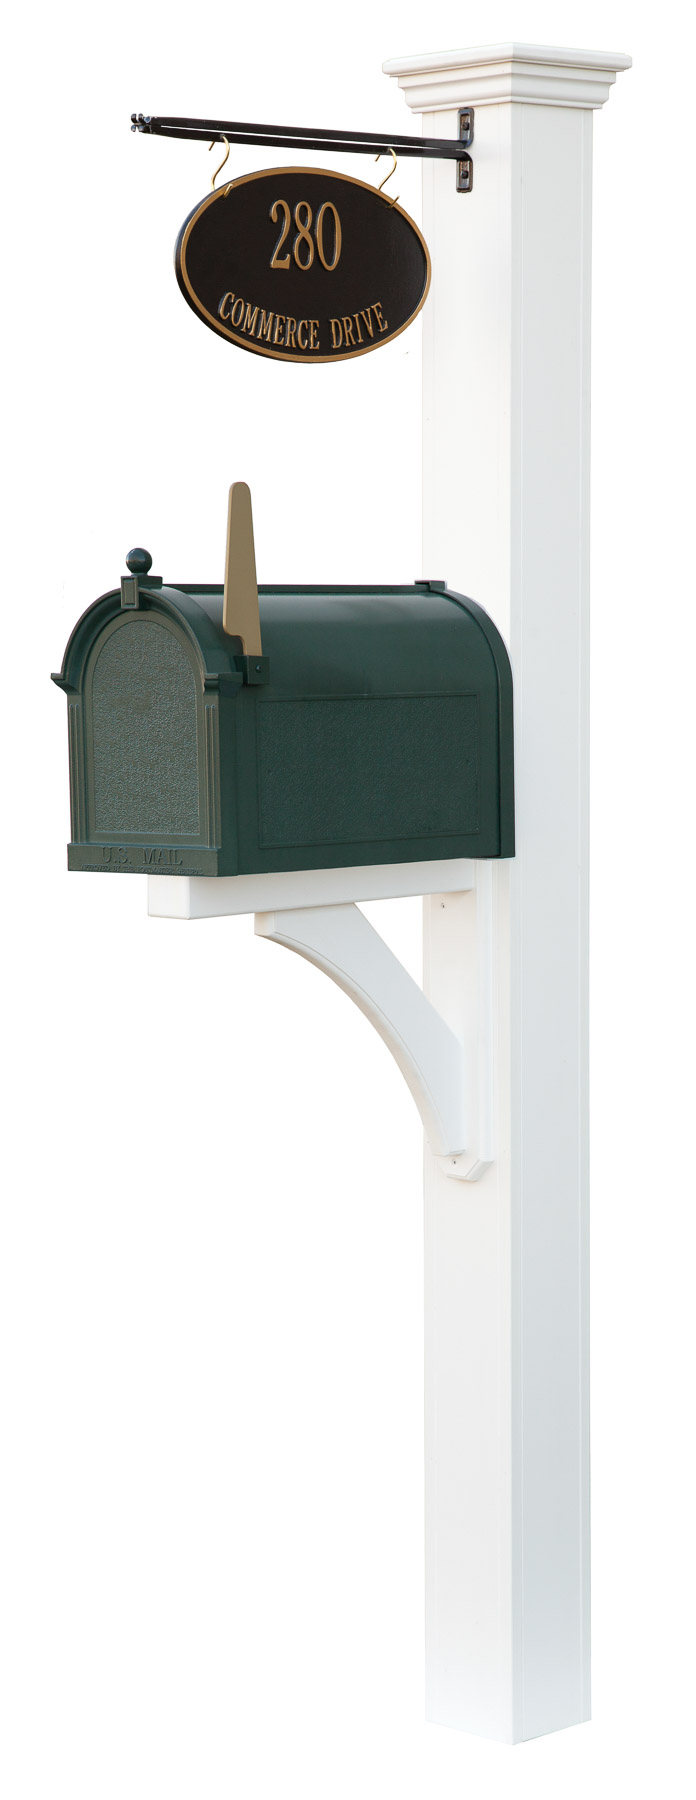 Mailbox Post - Extended Post For Sign Or Lamp